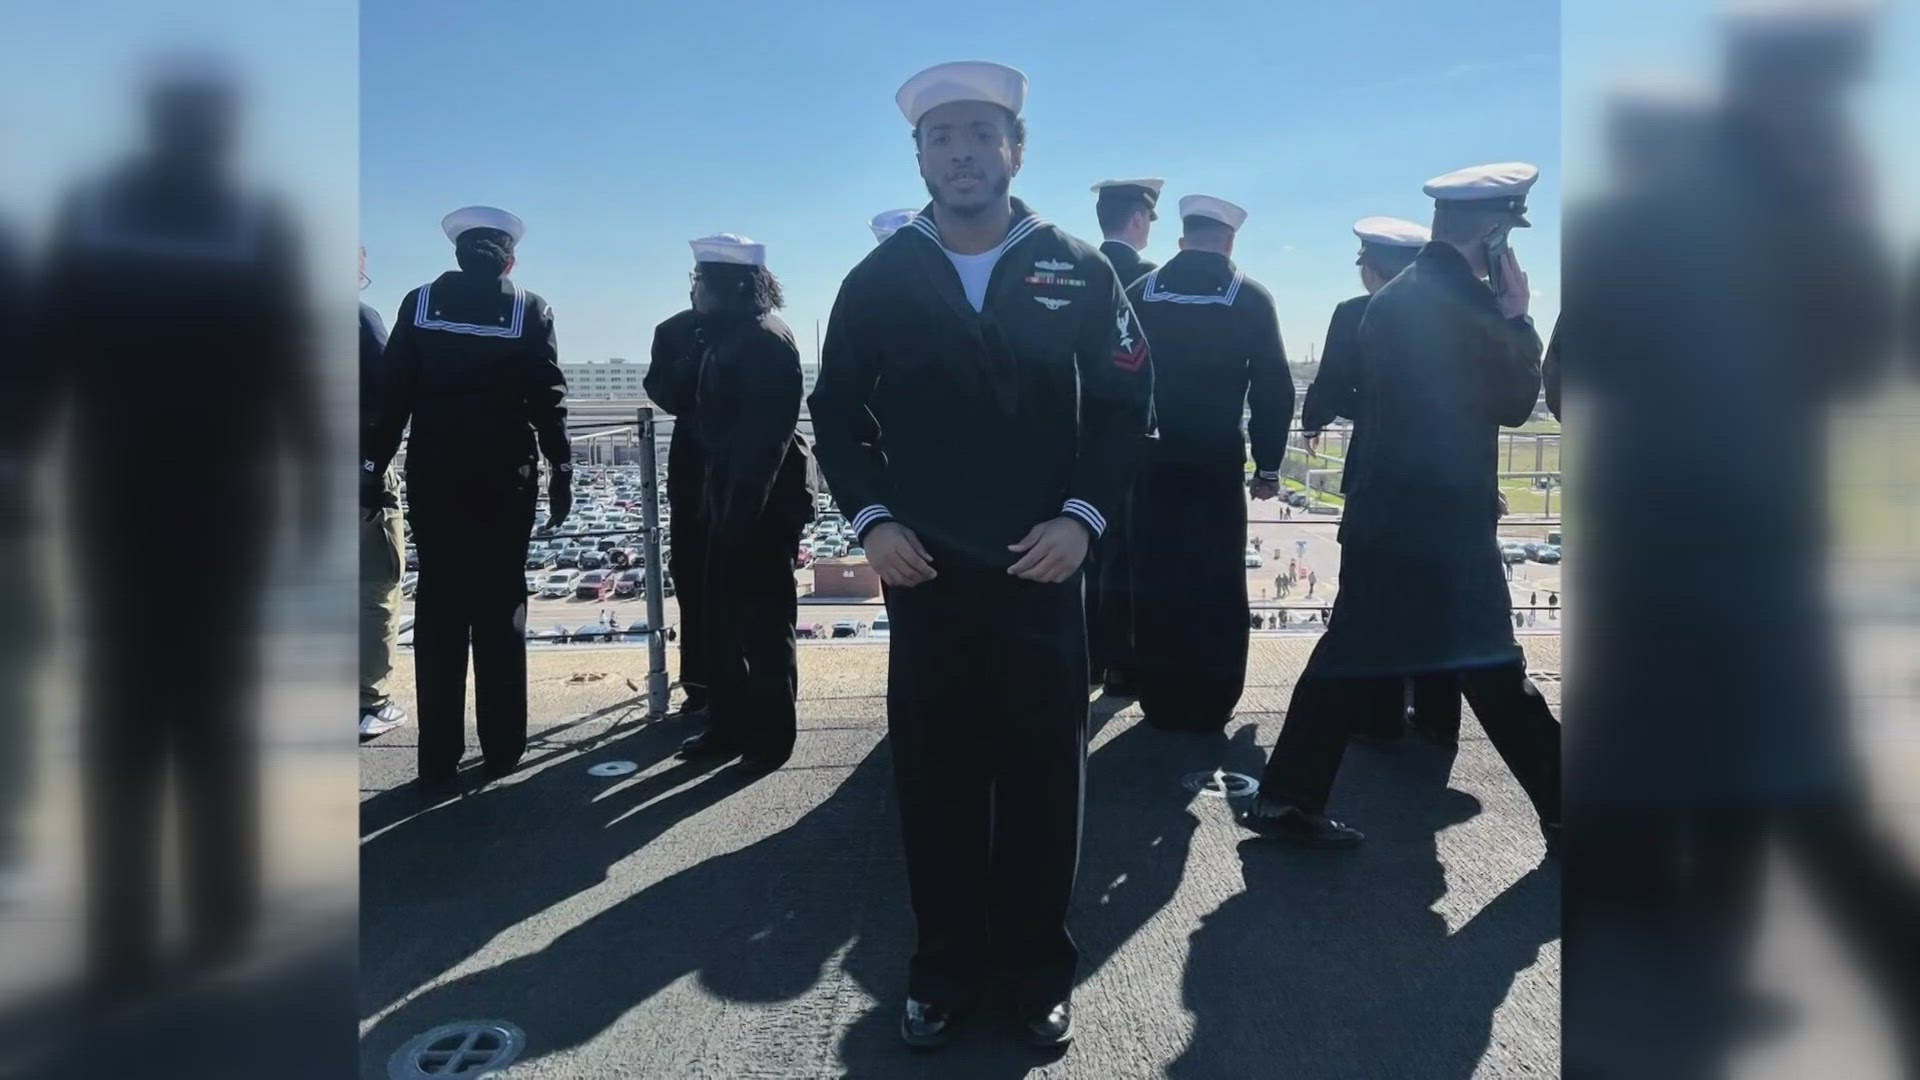 Hospital Corpsman 2nd Class Jalin Farrie told First Coast News that it's fun "to show off all the hard work" on his recap of Fleet Week Miami.